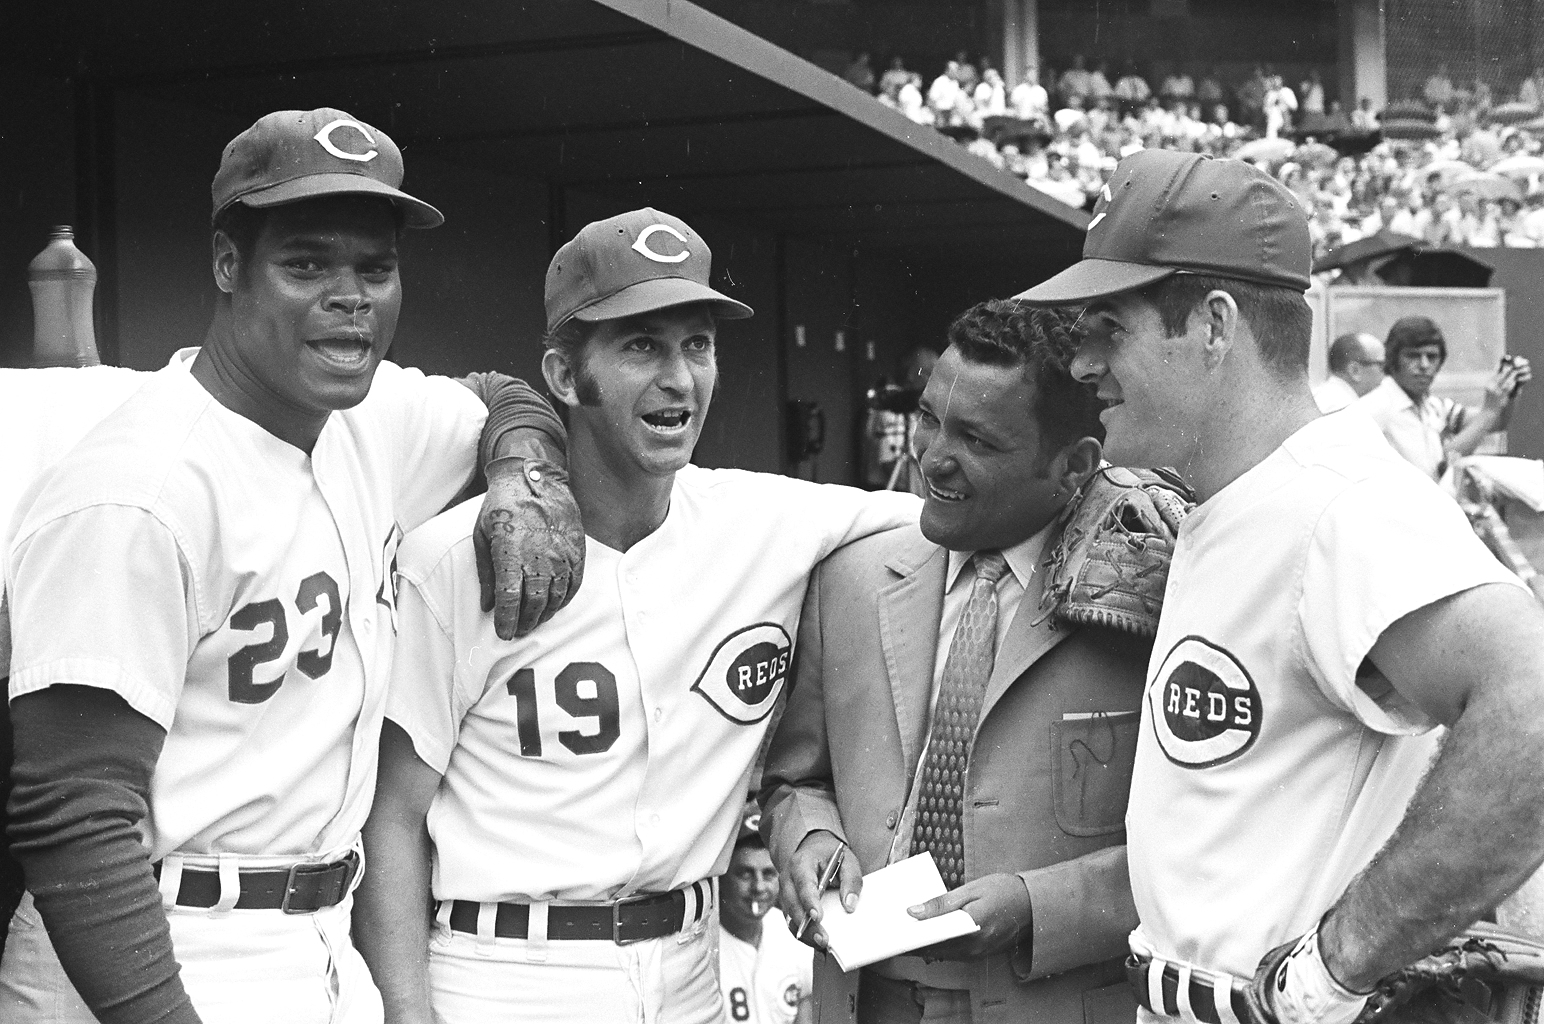  (Left to right): Lee May, Tommy Helms, Pete Rose (far right), 1970 or 1971 regular season, Riverfront Stadium.       